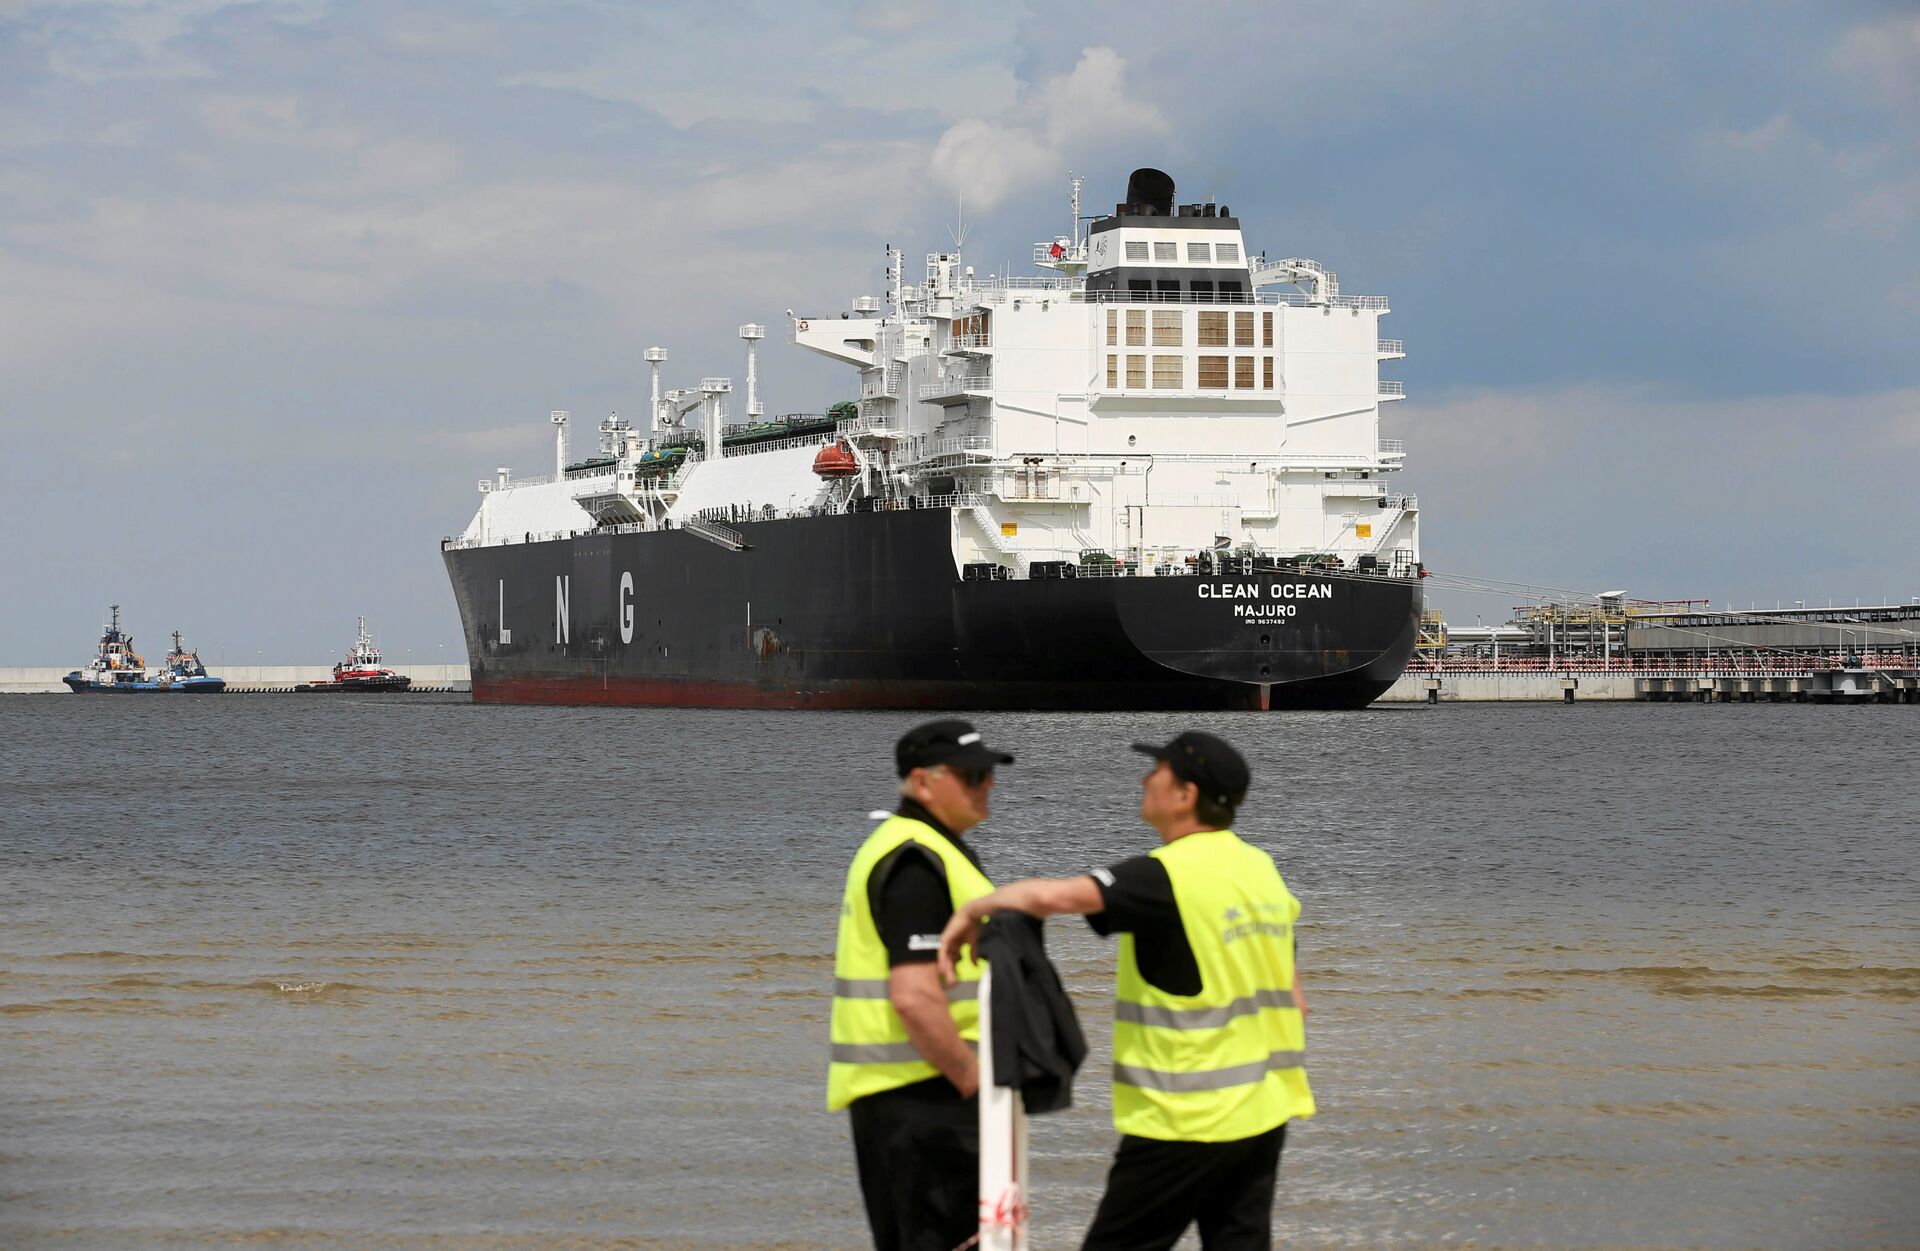 The LNG tanker Clean Ocean is pictured during the first U.S. delivery of liquefied natural gas to LNG terminal in Swinoujscie, Poland June 8, 2017 - Sputnik International, 1920, 10.03.2022